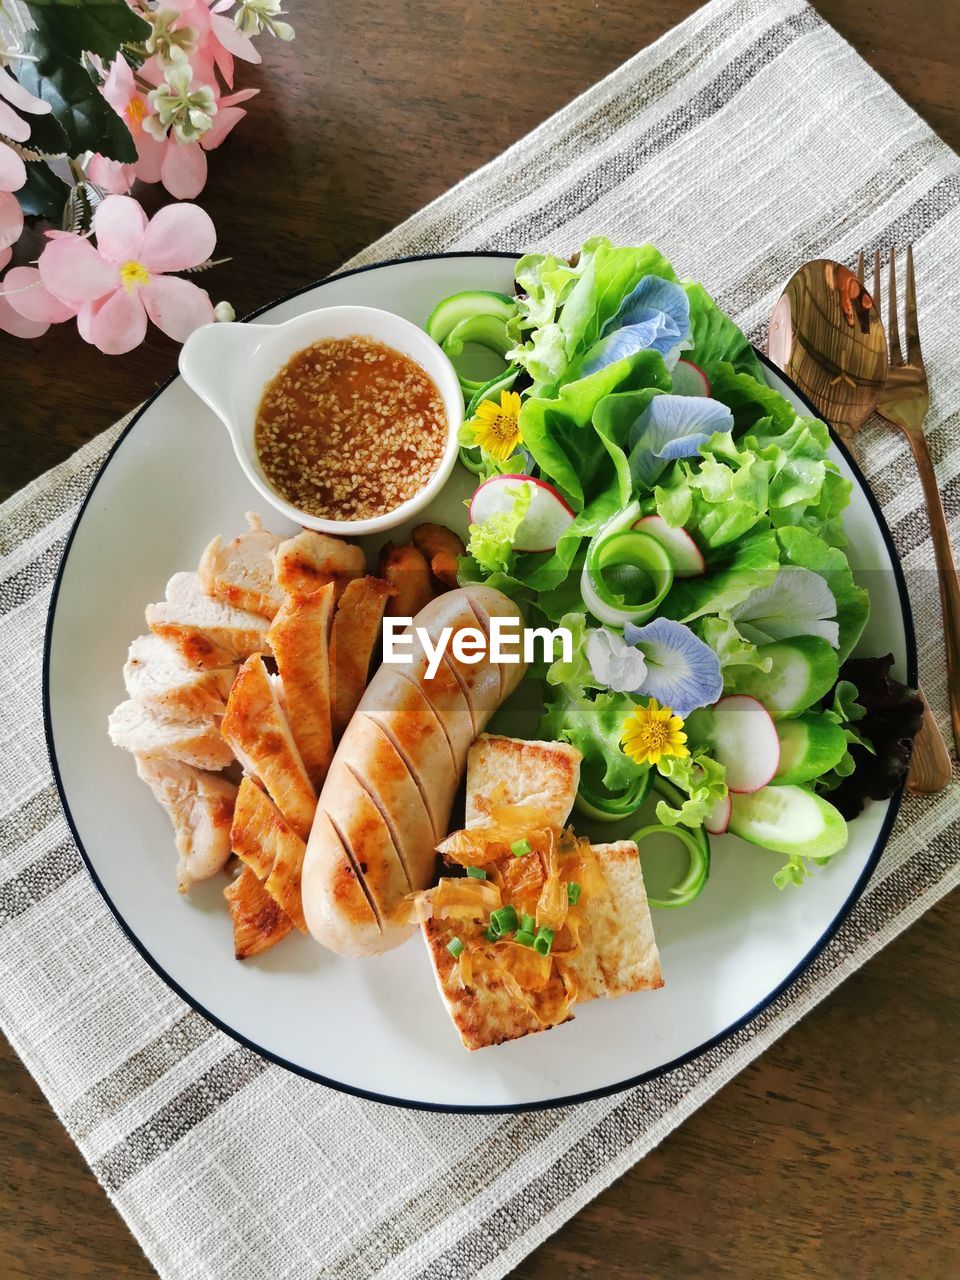 high angle view of food served in plate on table